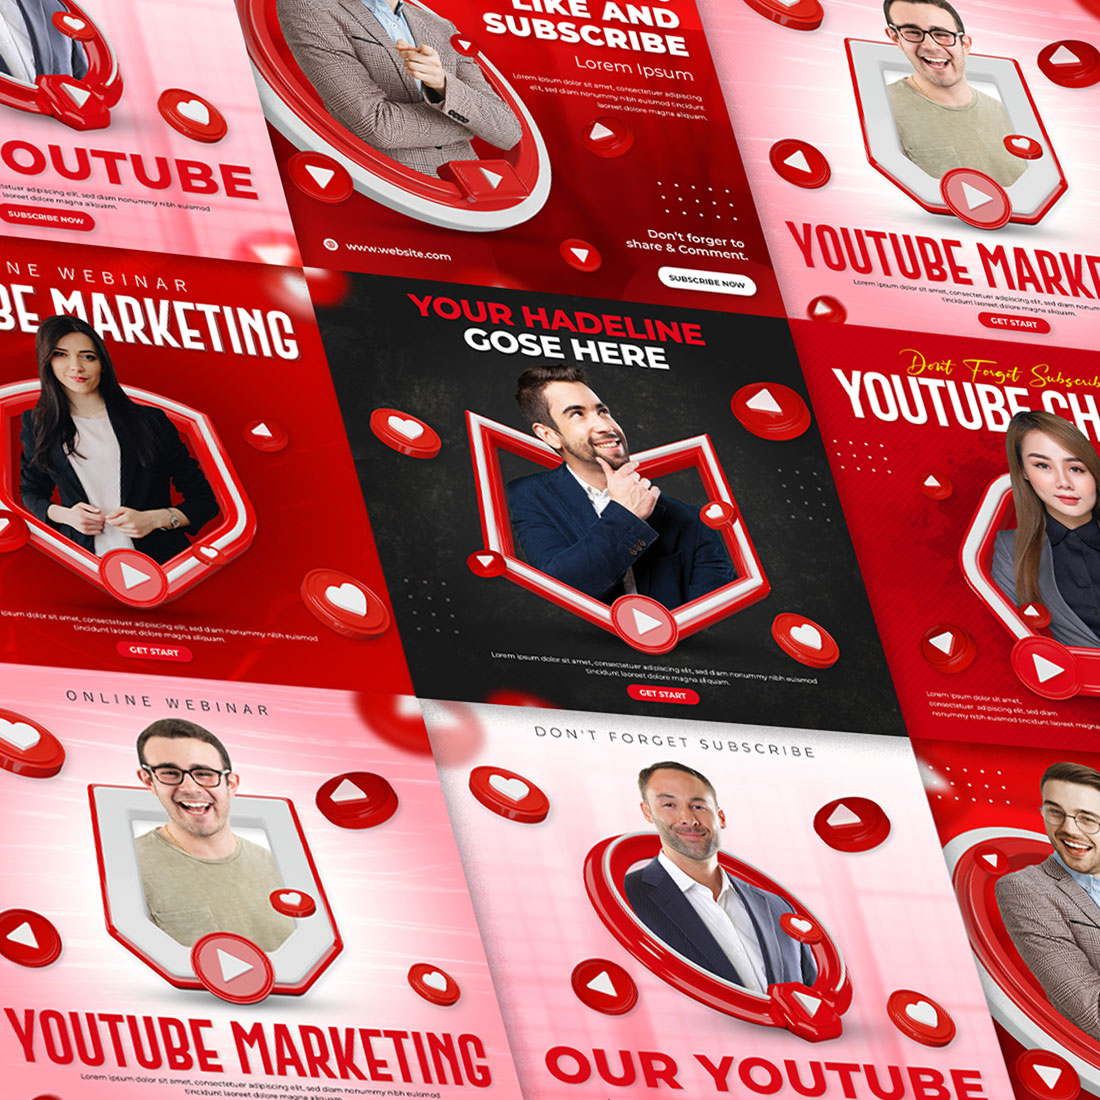 Youtube Marketing Social Media Promotion Post Template Set cover image.